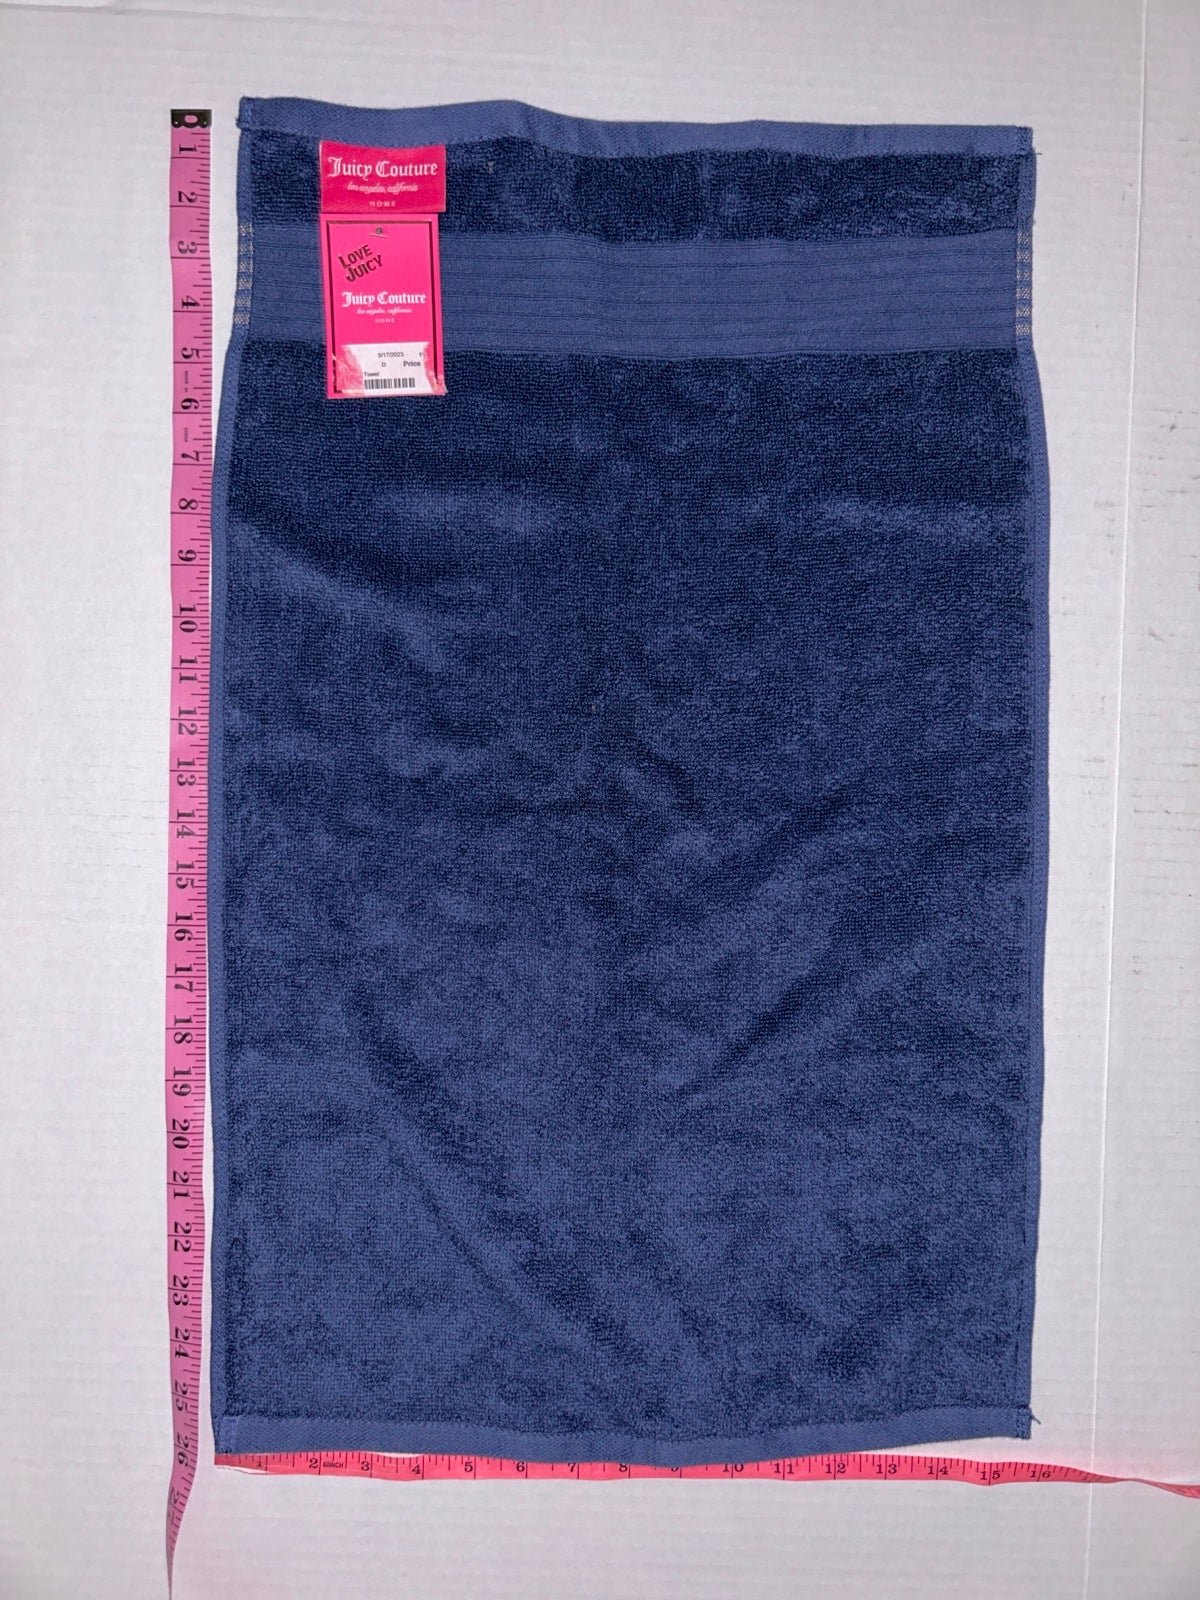 Juicy couture Hand Towel Navy NEW cotton nOuUx2ygT